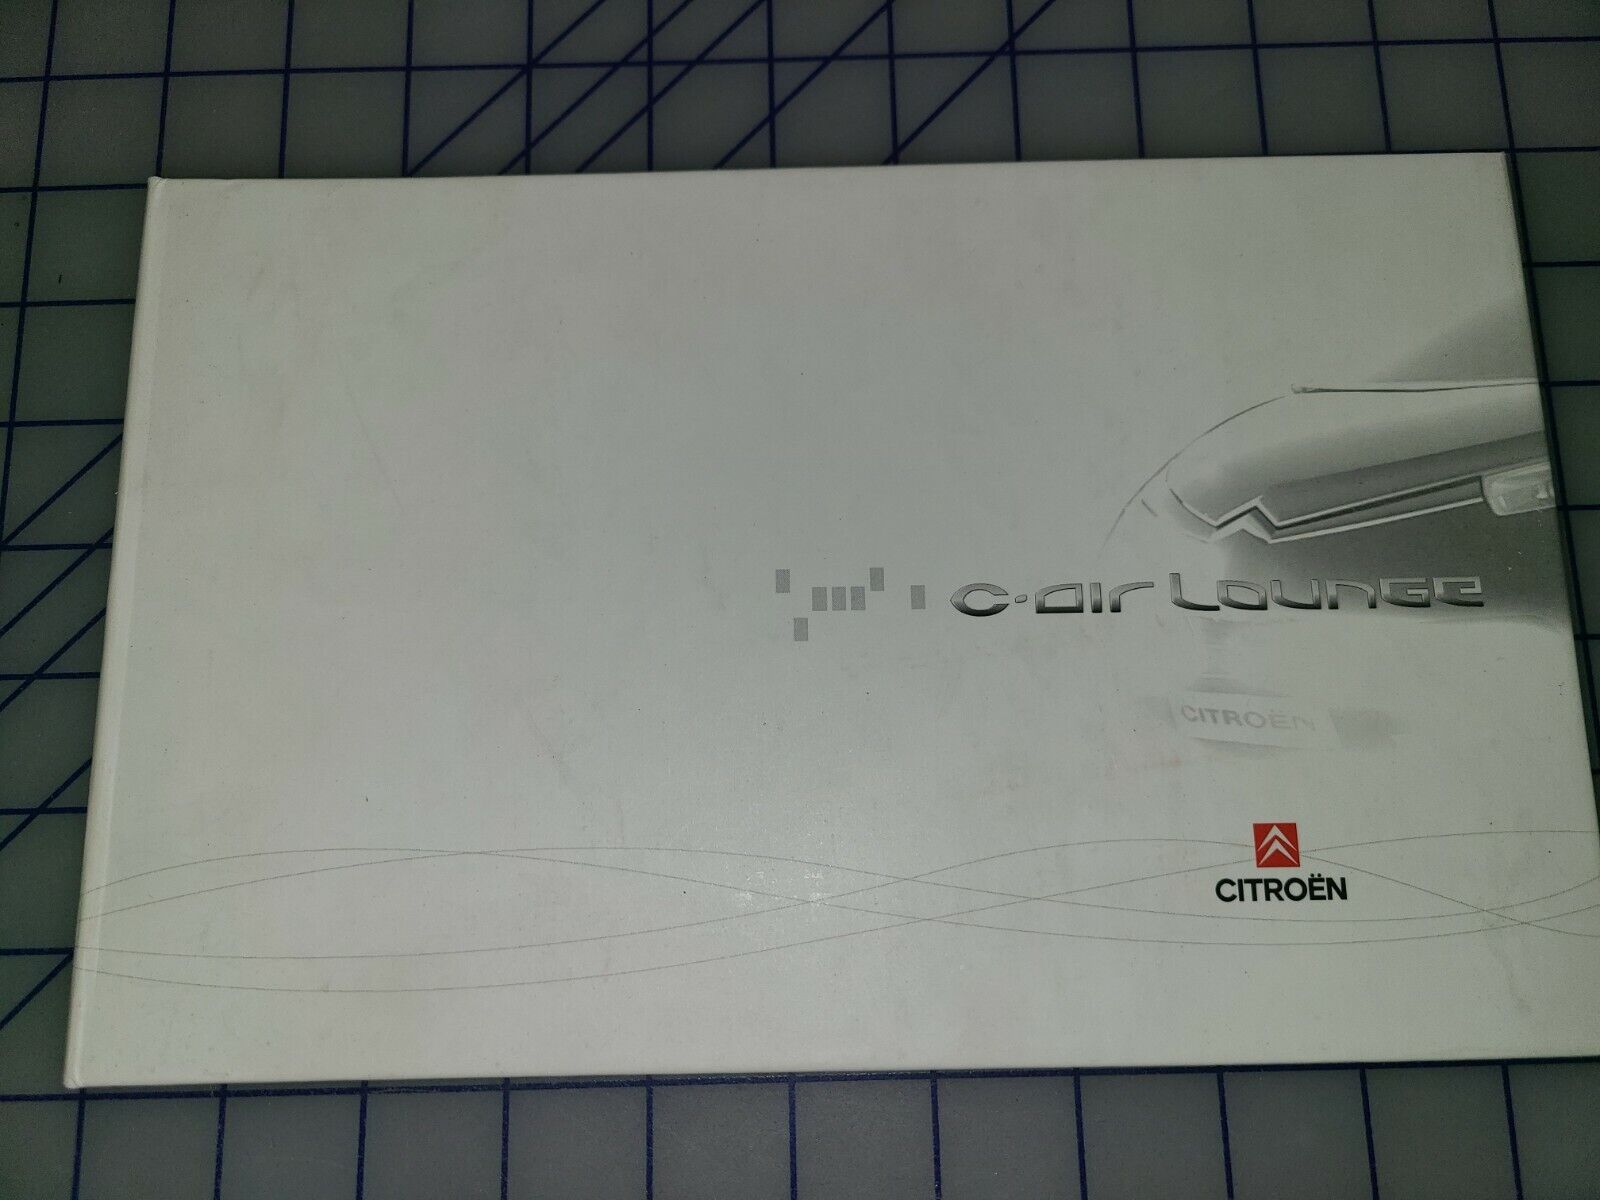 2003 2004 Citroen C Air Launge Concept Press Kit Product Information and CD  